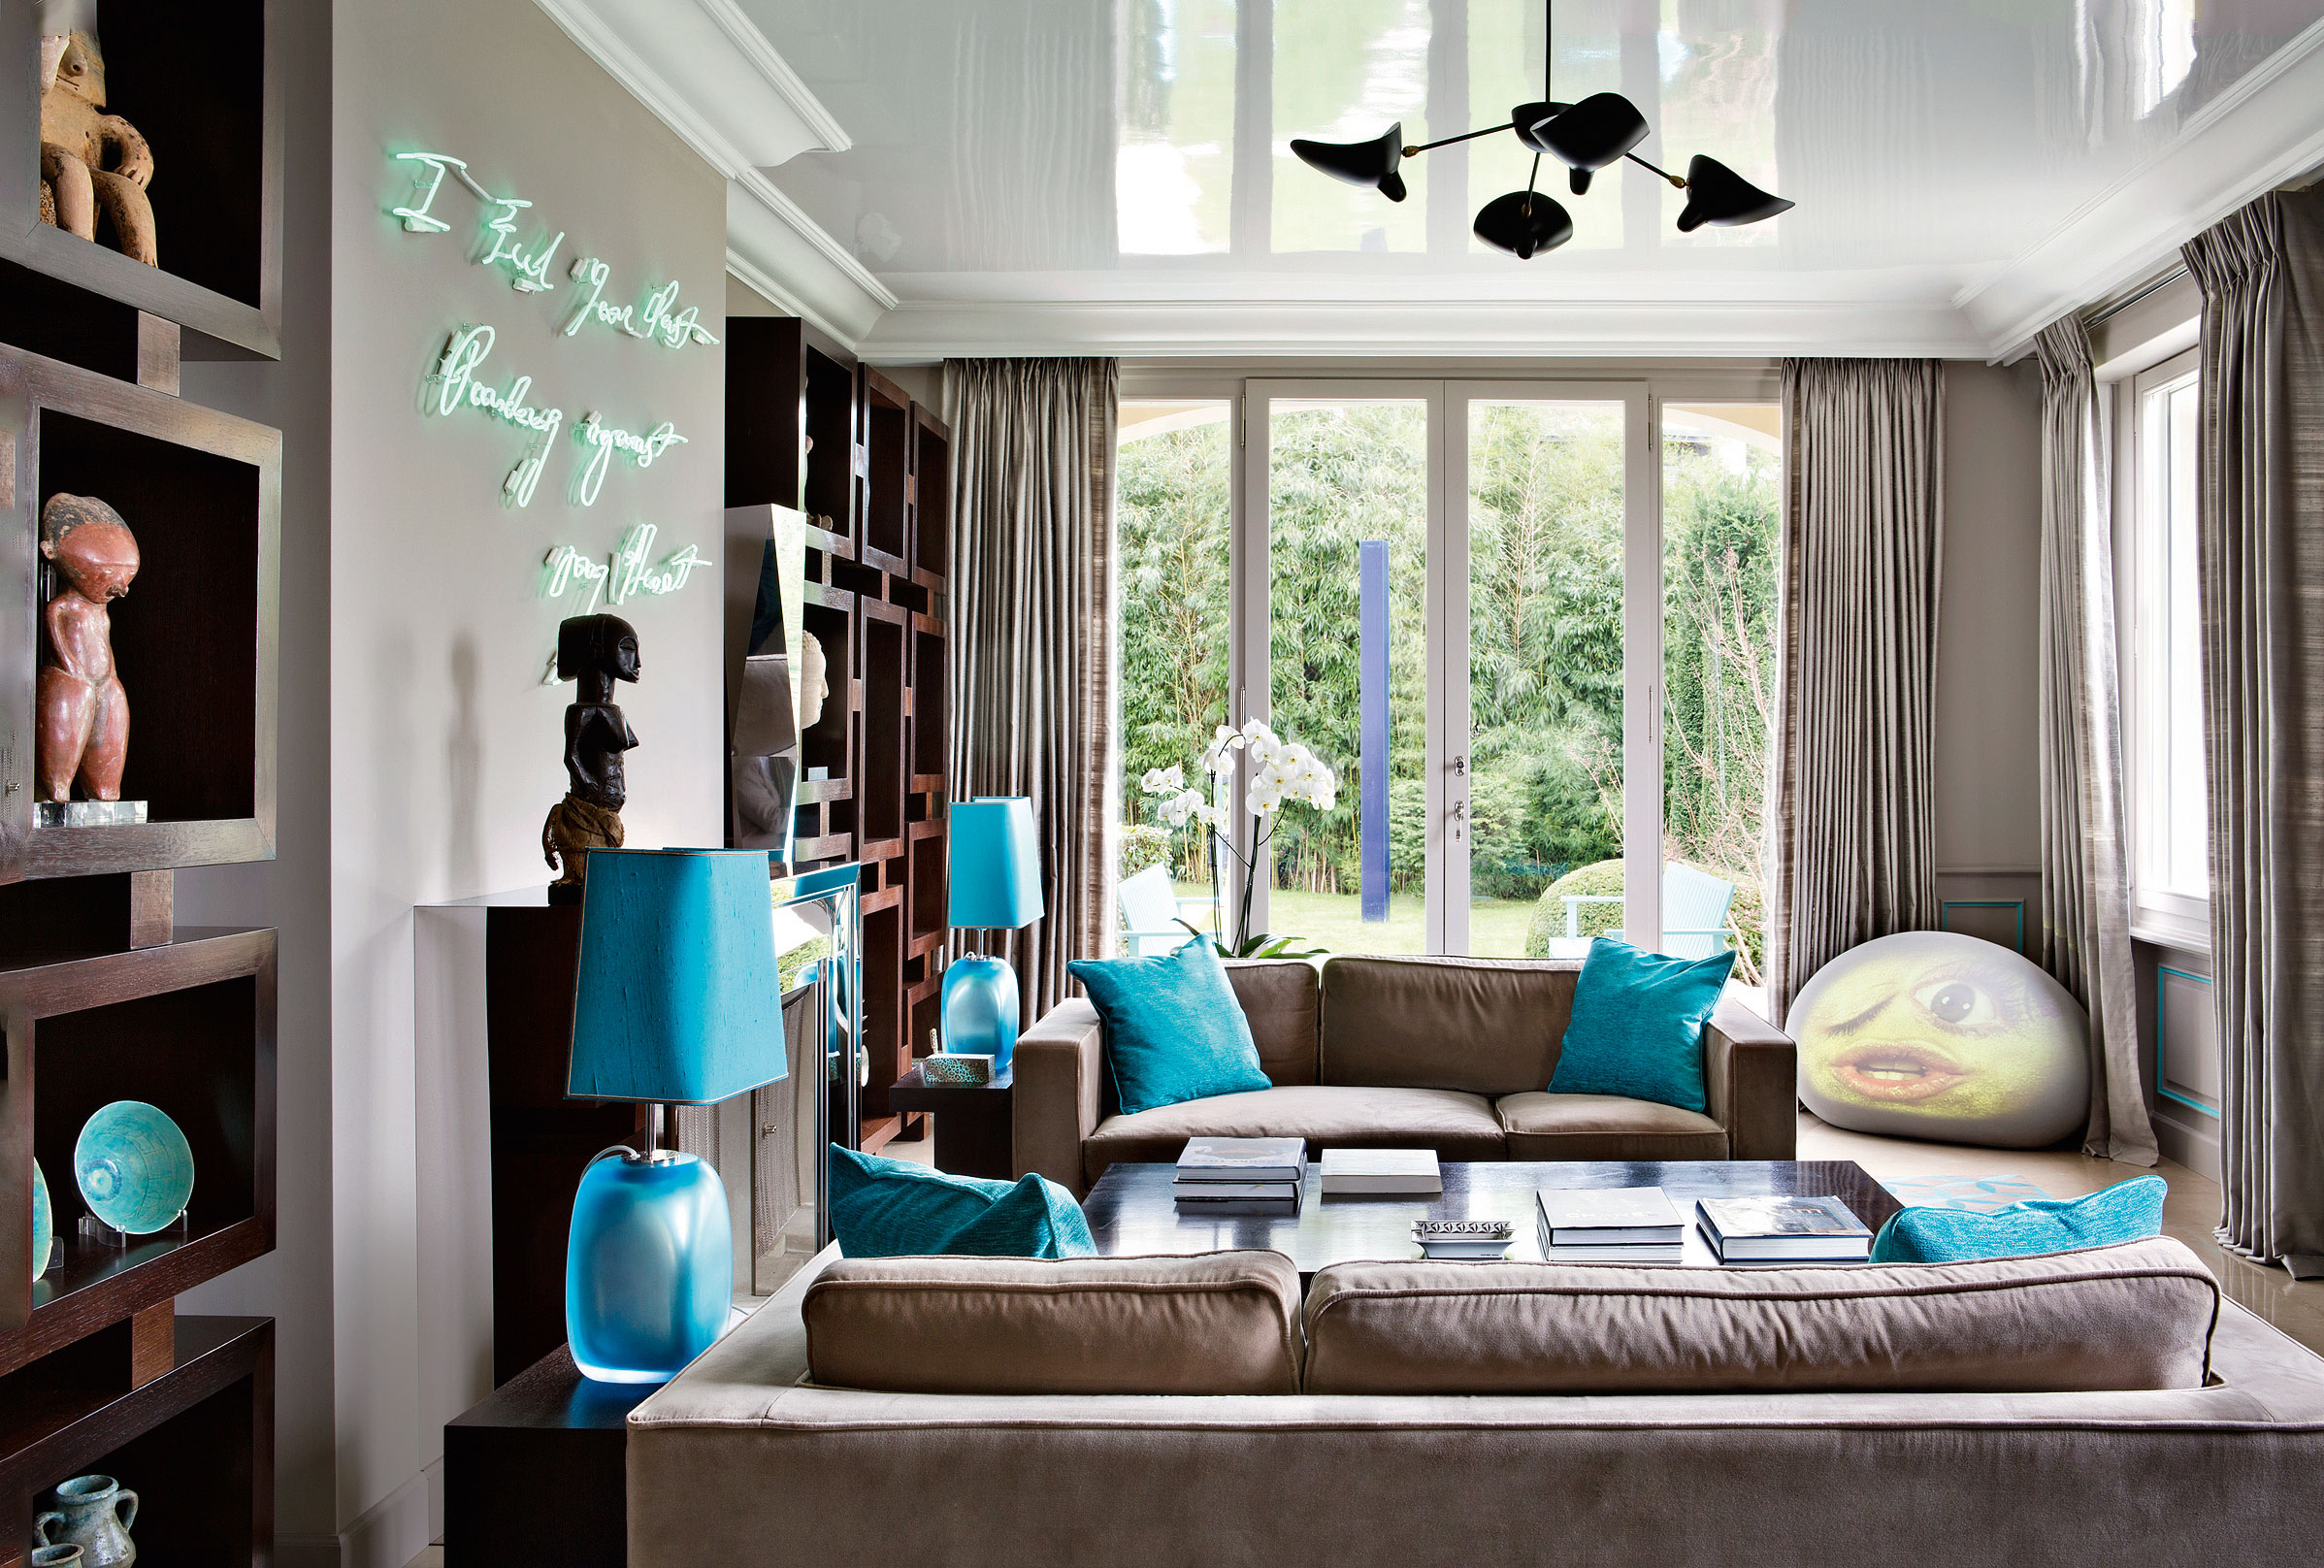 bright interior of the apartment in turquoise color